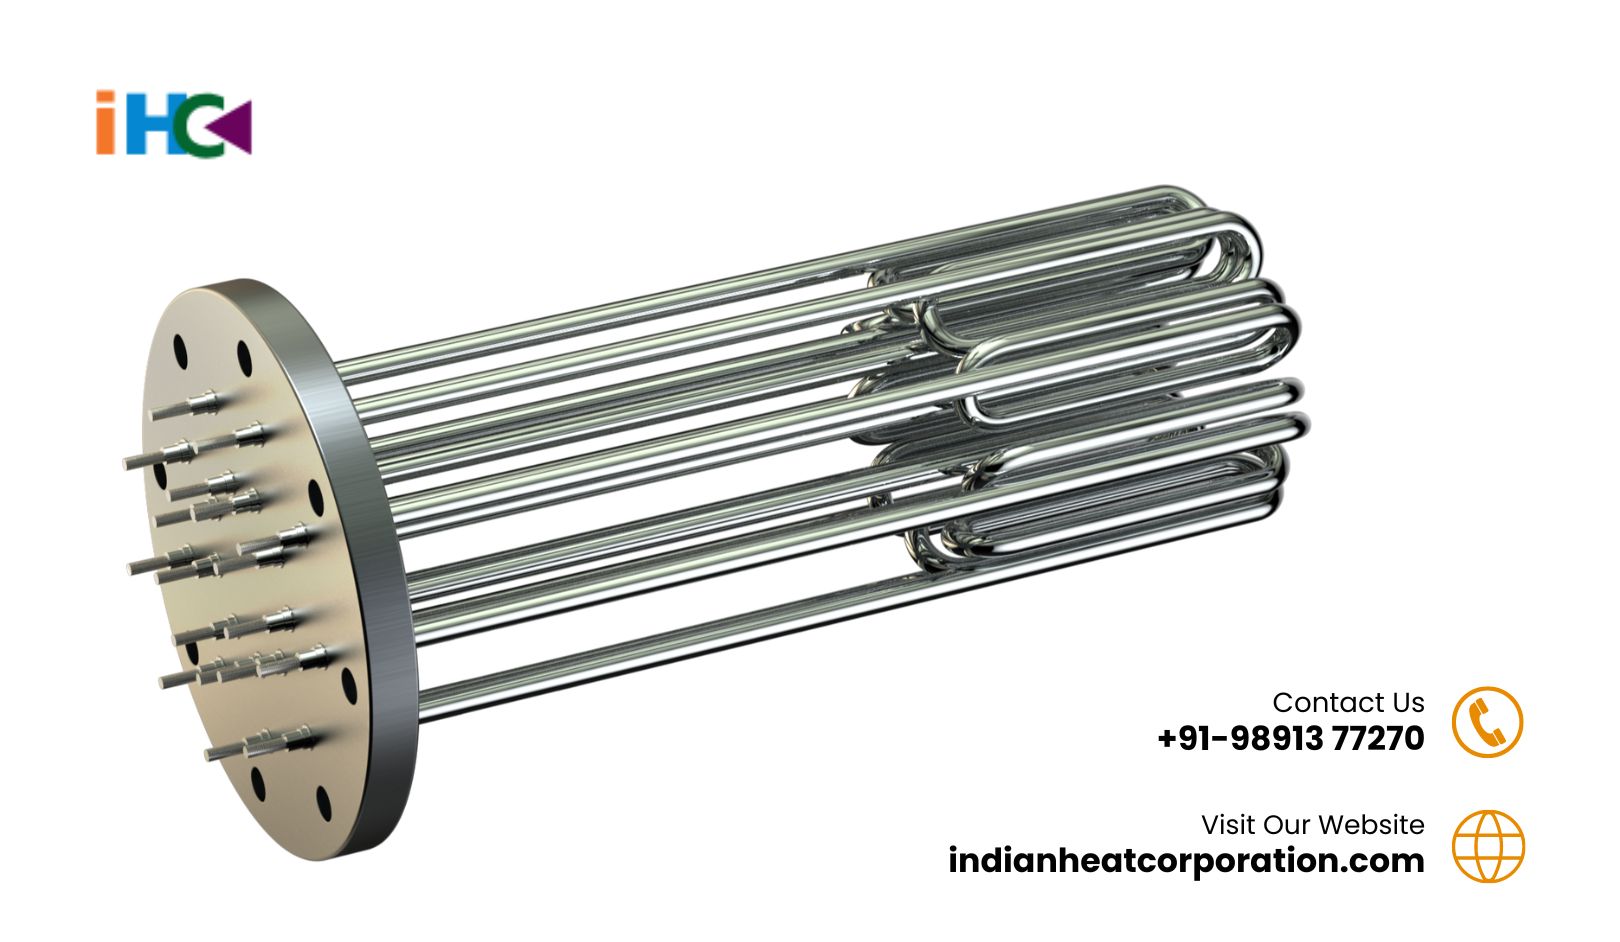 Immersion Heaters Manufacturers & Suppliers in Delhi, India